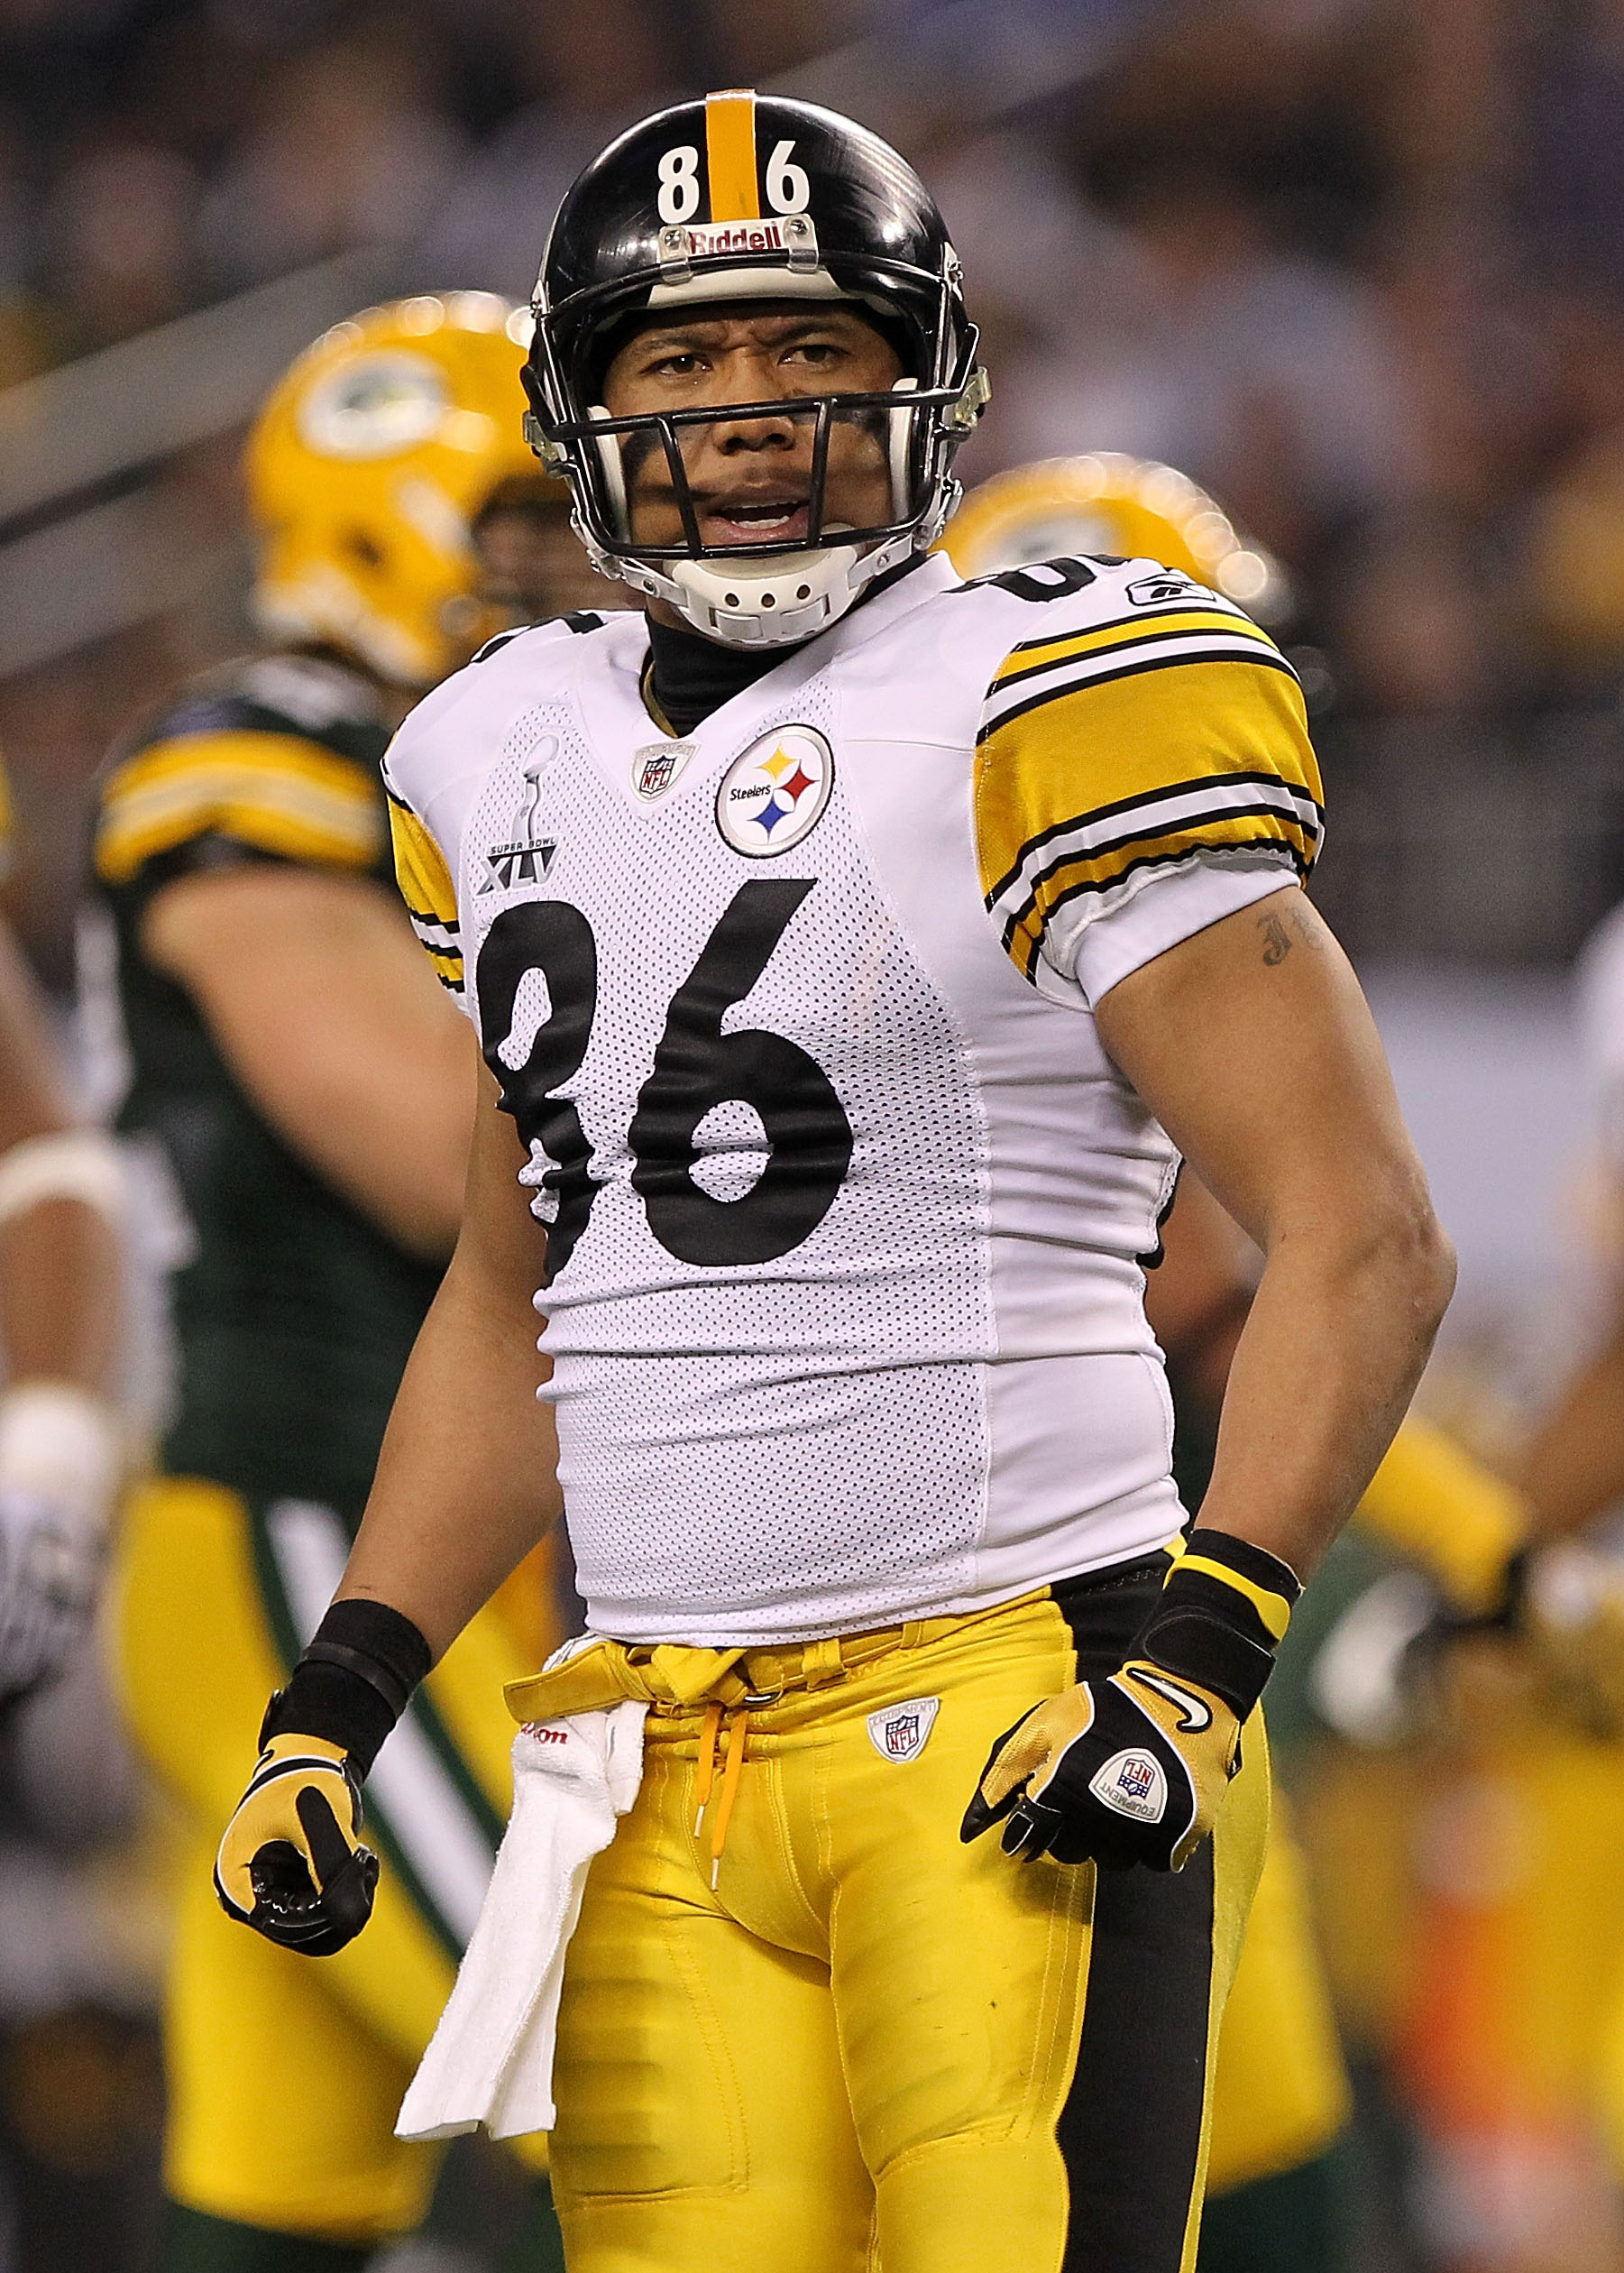 ARLINGTON, TX - FEBRUARY 06:  Hines Ward #86 of the Pittsburgh Steelers looks on while taking on the Green Bay Packers during Super Bowl XLV at Cowboys Stadium on February 6, 2011 in Arlington, Texas.  (Photo by Doug Pensinger/Getty Images)